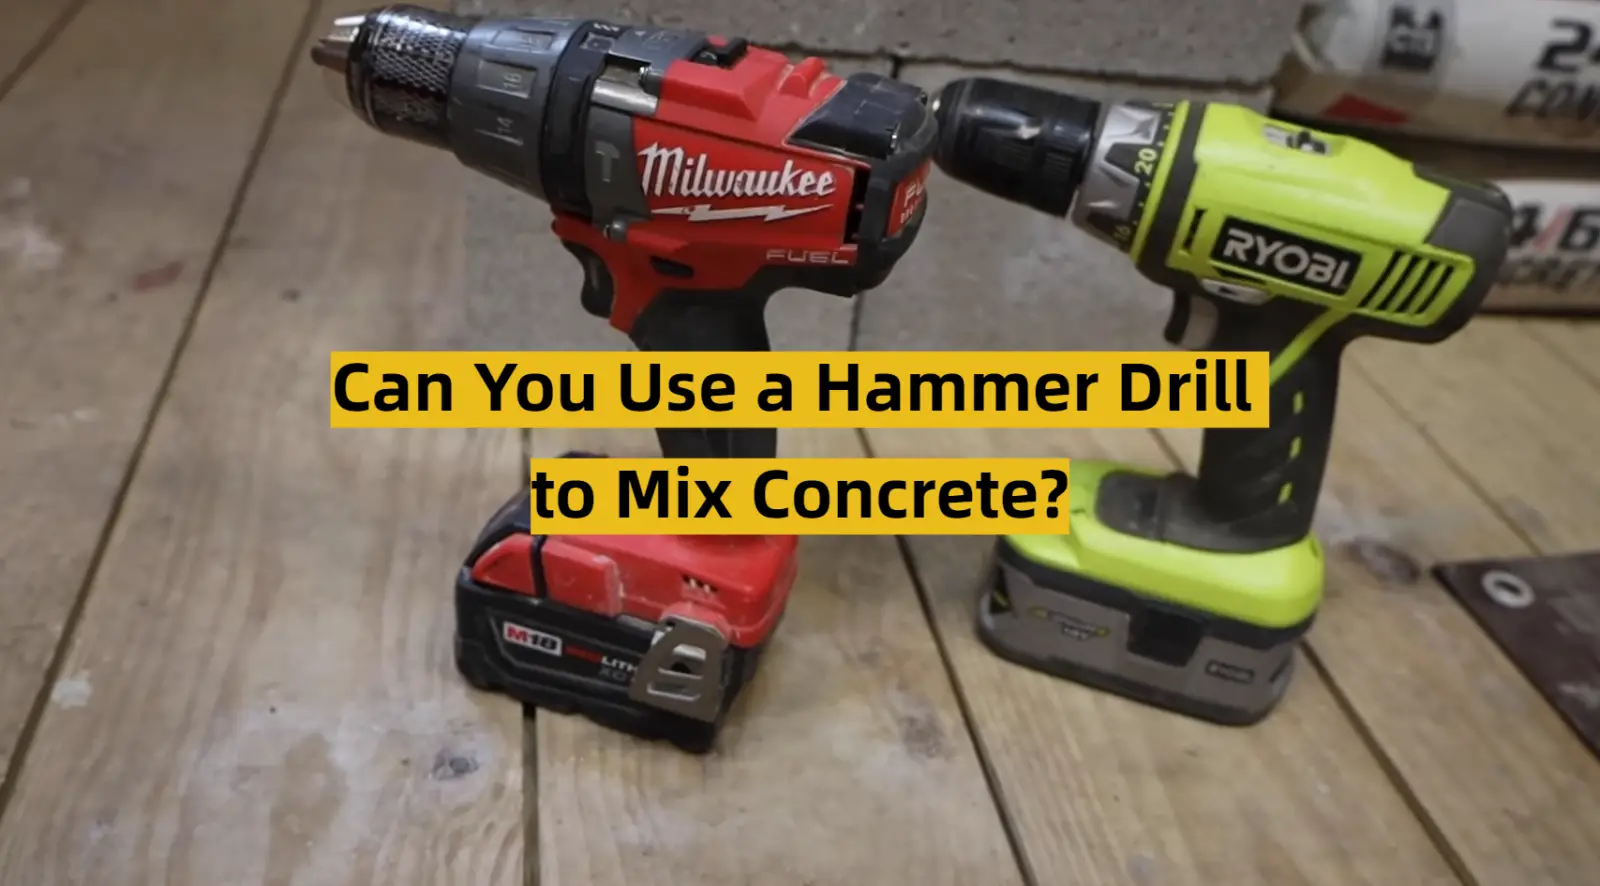 Can You Use a Hammer Drill to Mix Concrete?